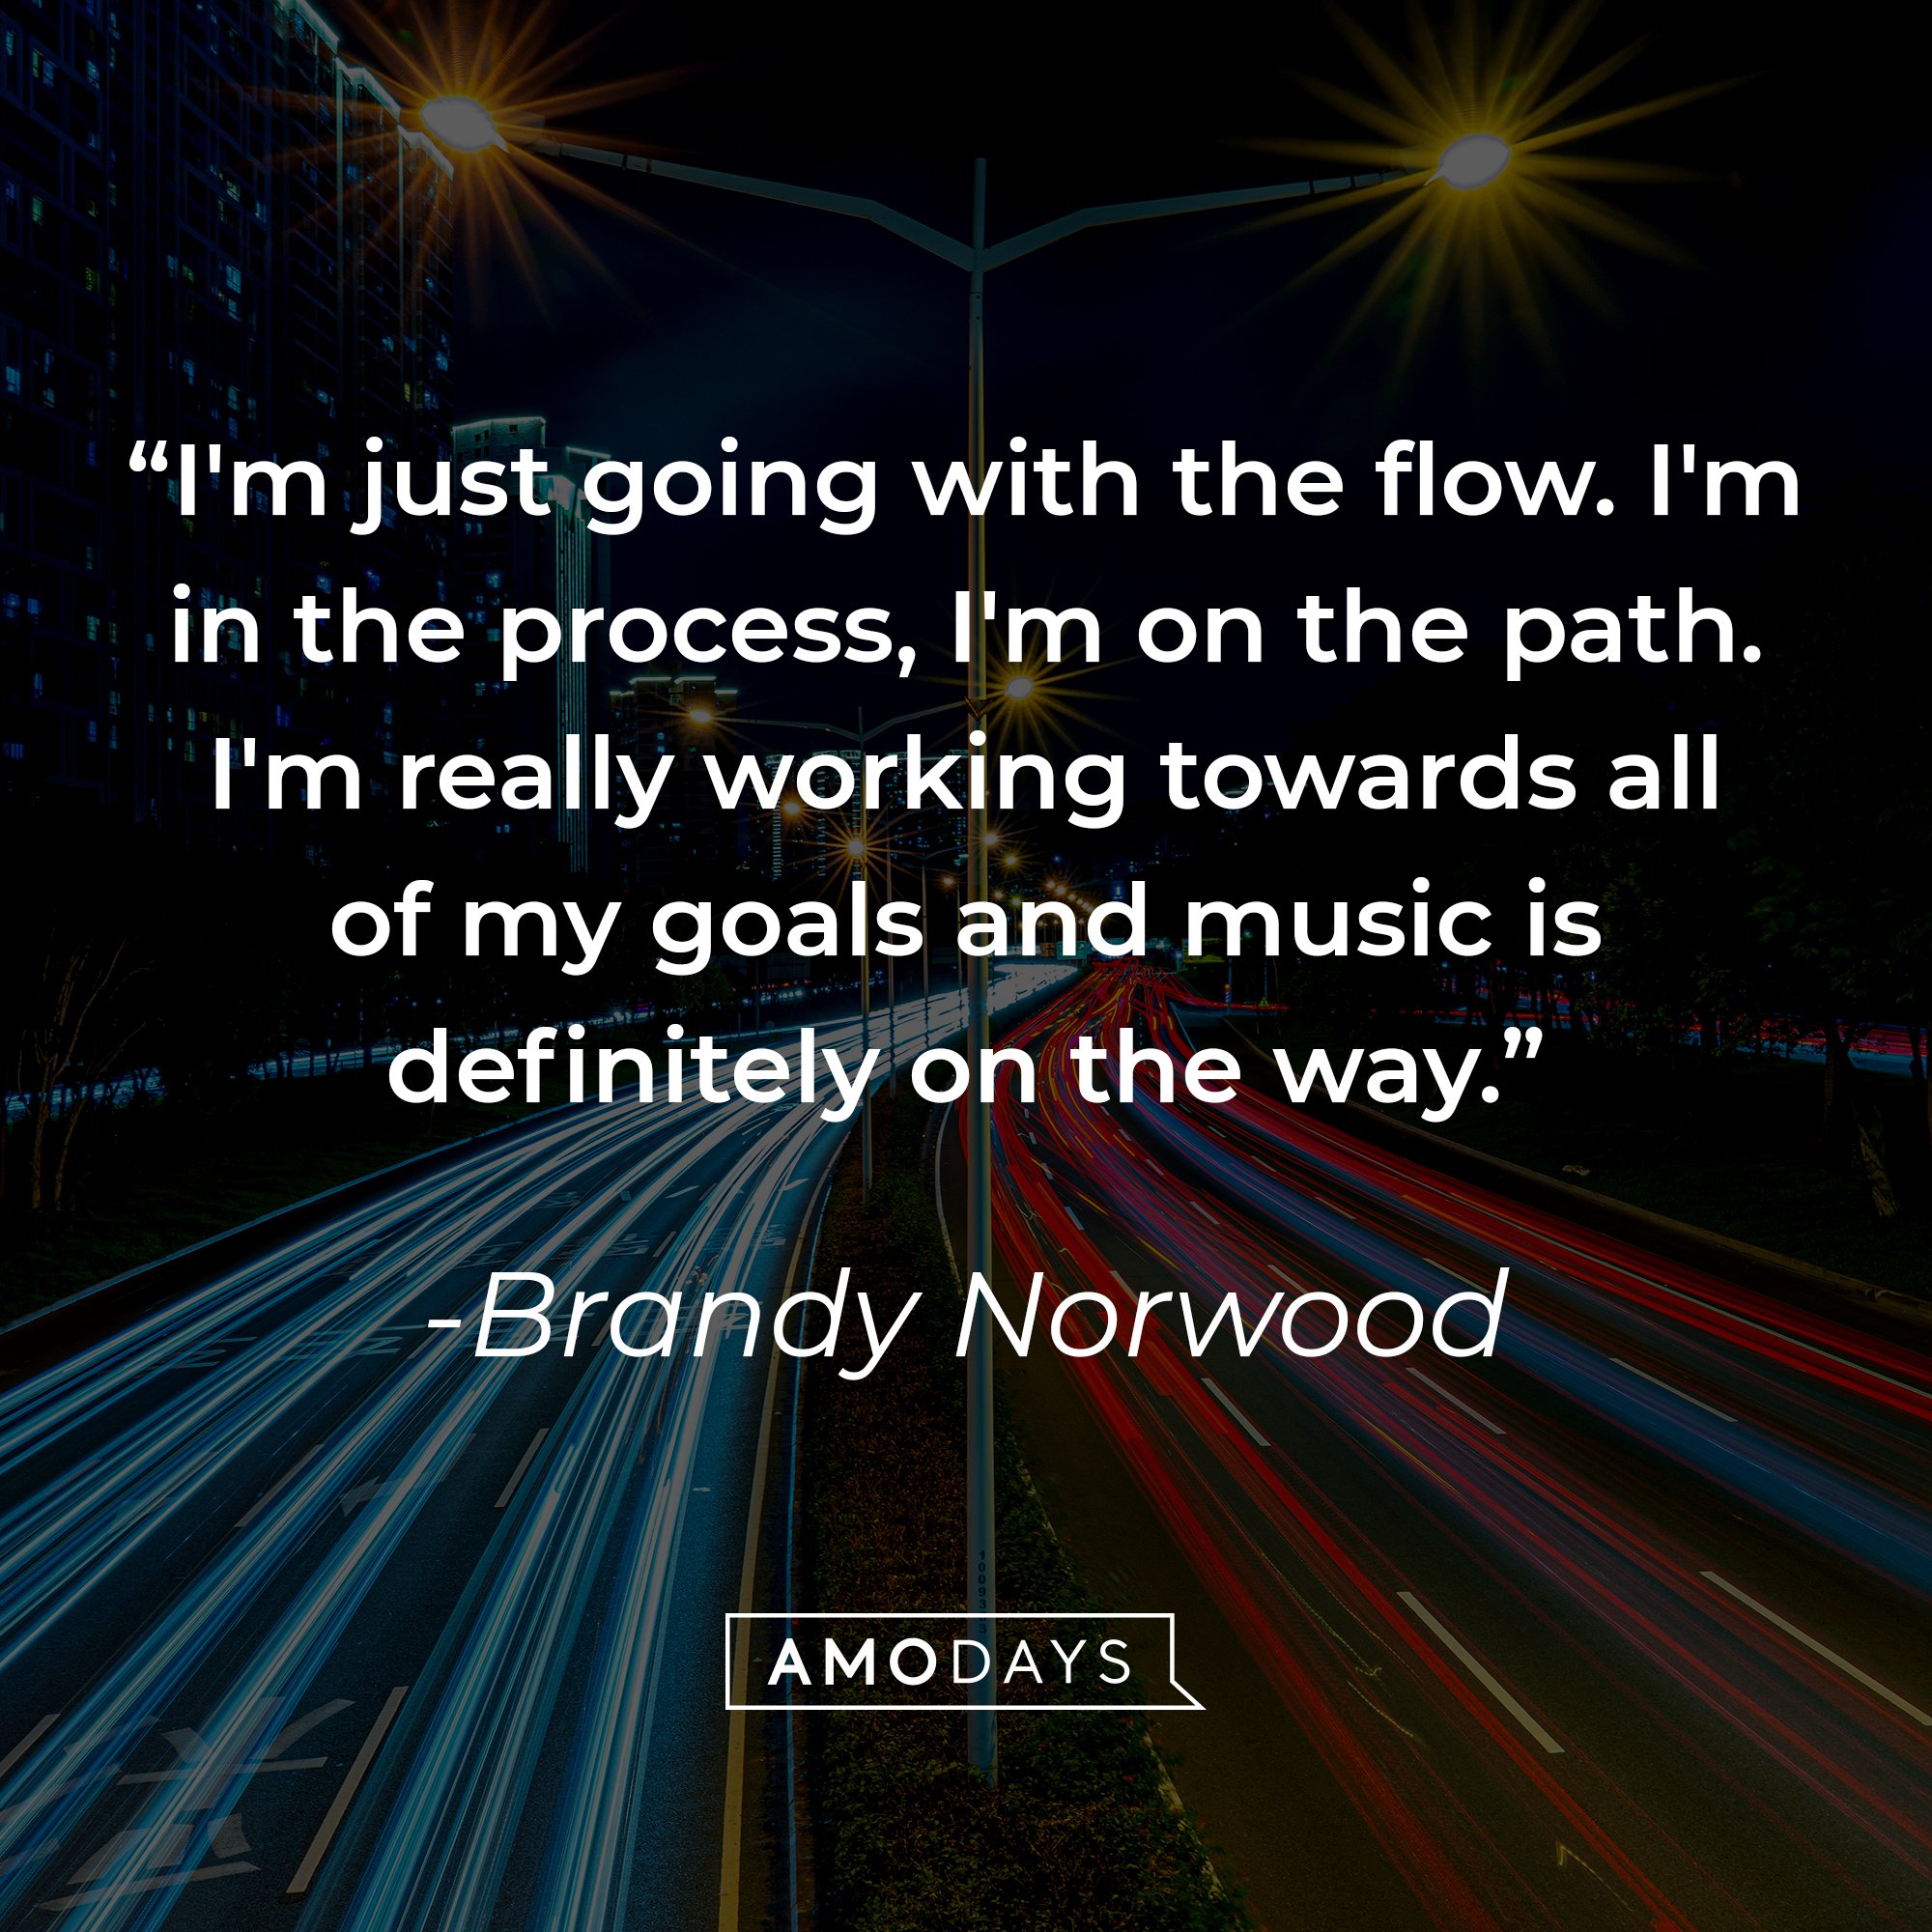 Brandy Norwood's quote: "I'm just going with the flow. I'm in the process, I'm on the path. I'm really working towards all of my goals and music is definitely on the way." | Image: AmoDays